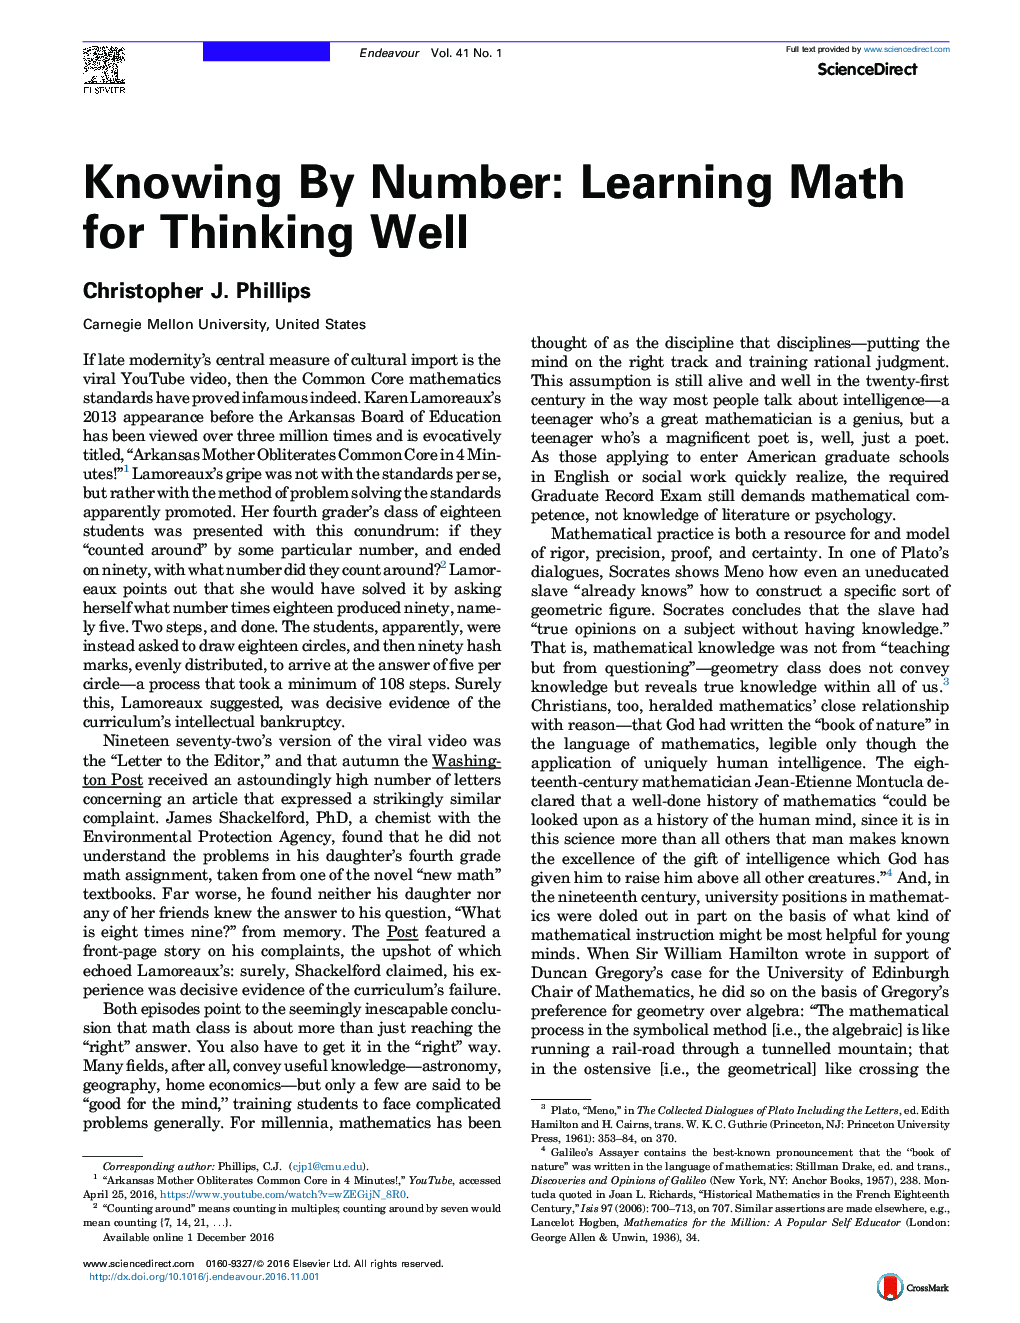 Knowing By Number: Learning Math for Thinking Well